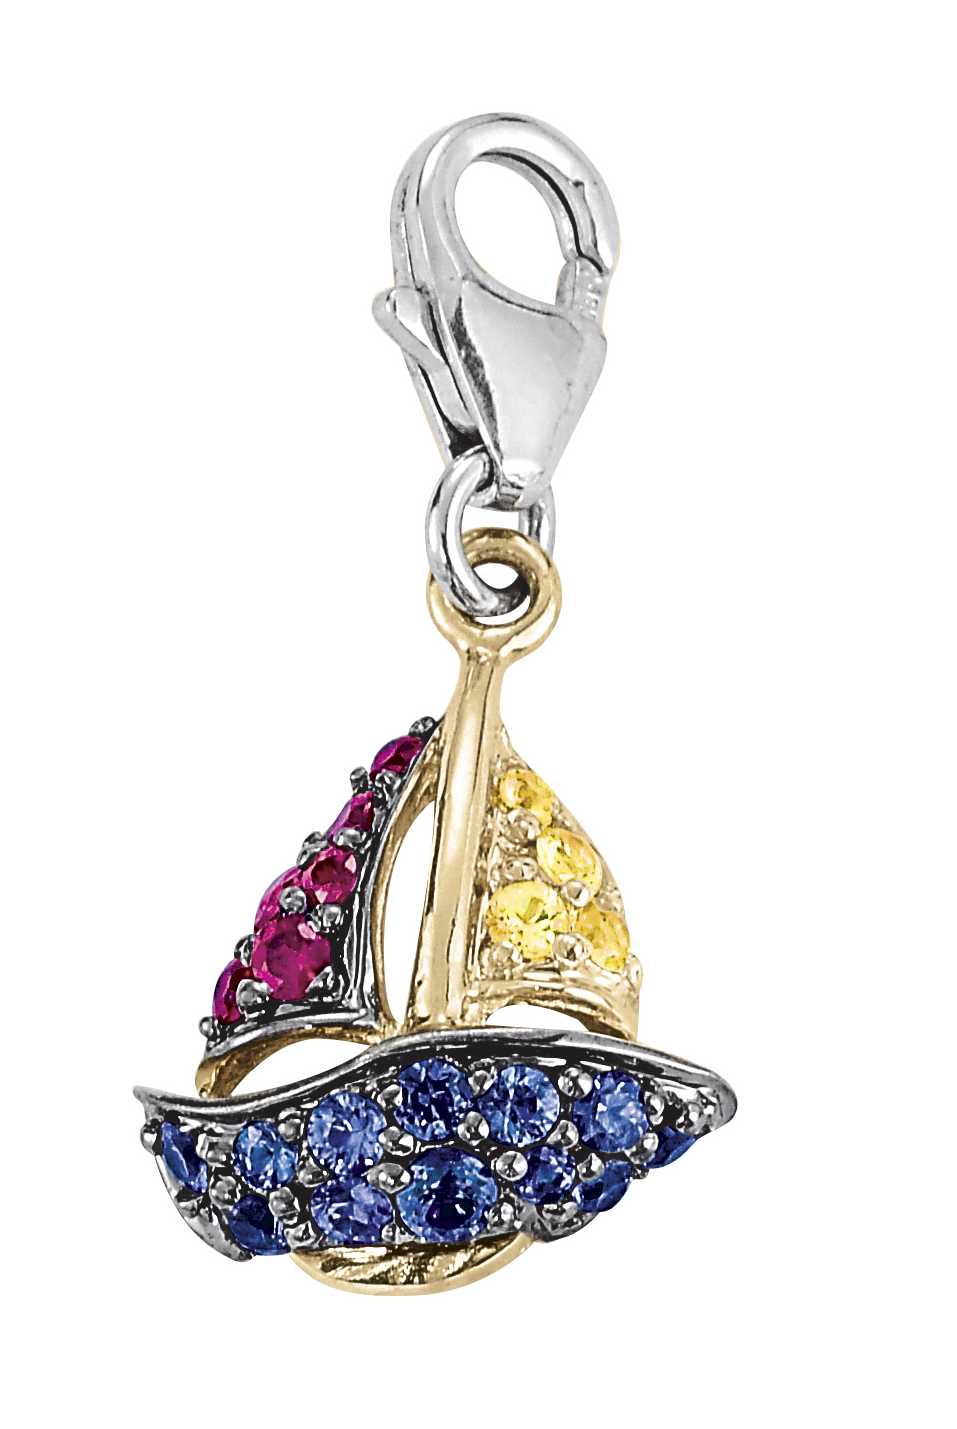 
14k Two-Tone Sail Boat Round 1.5 mm Sapphire Charm
